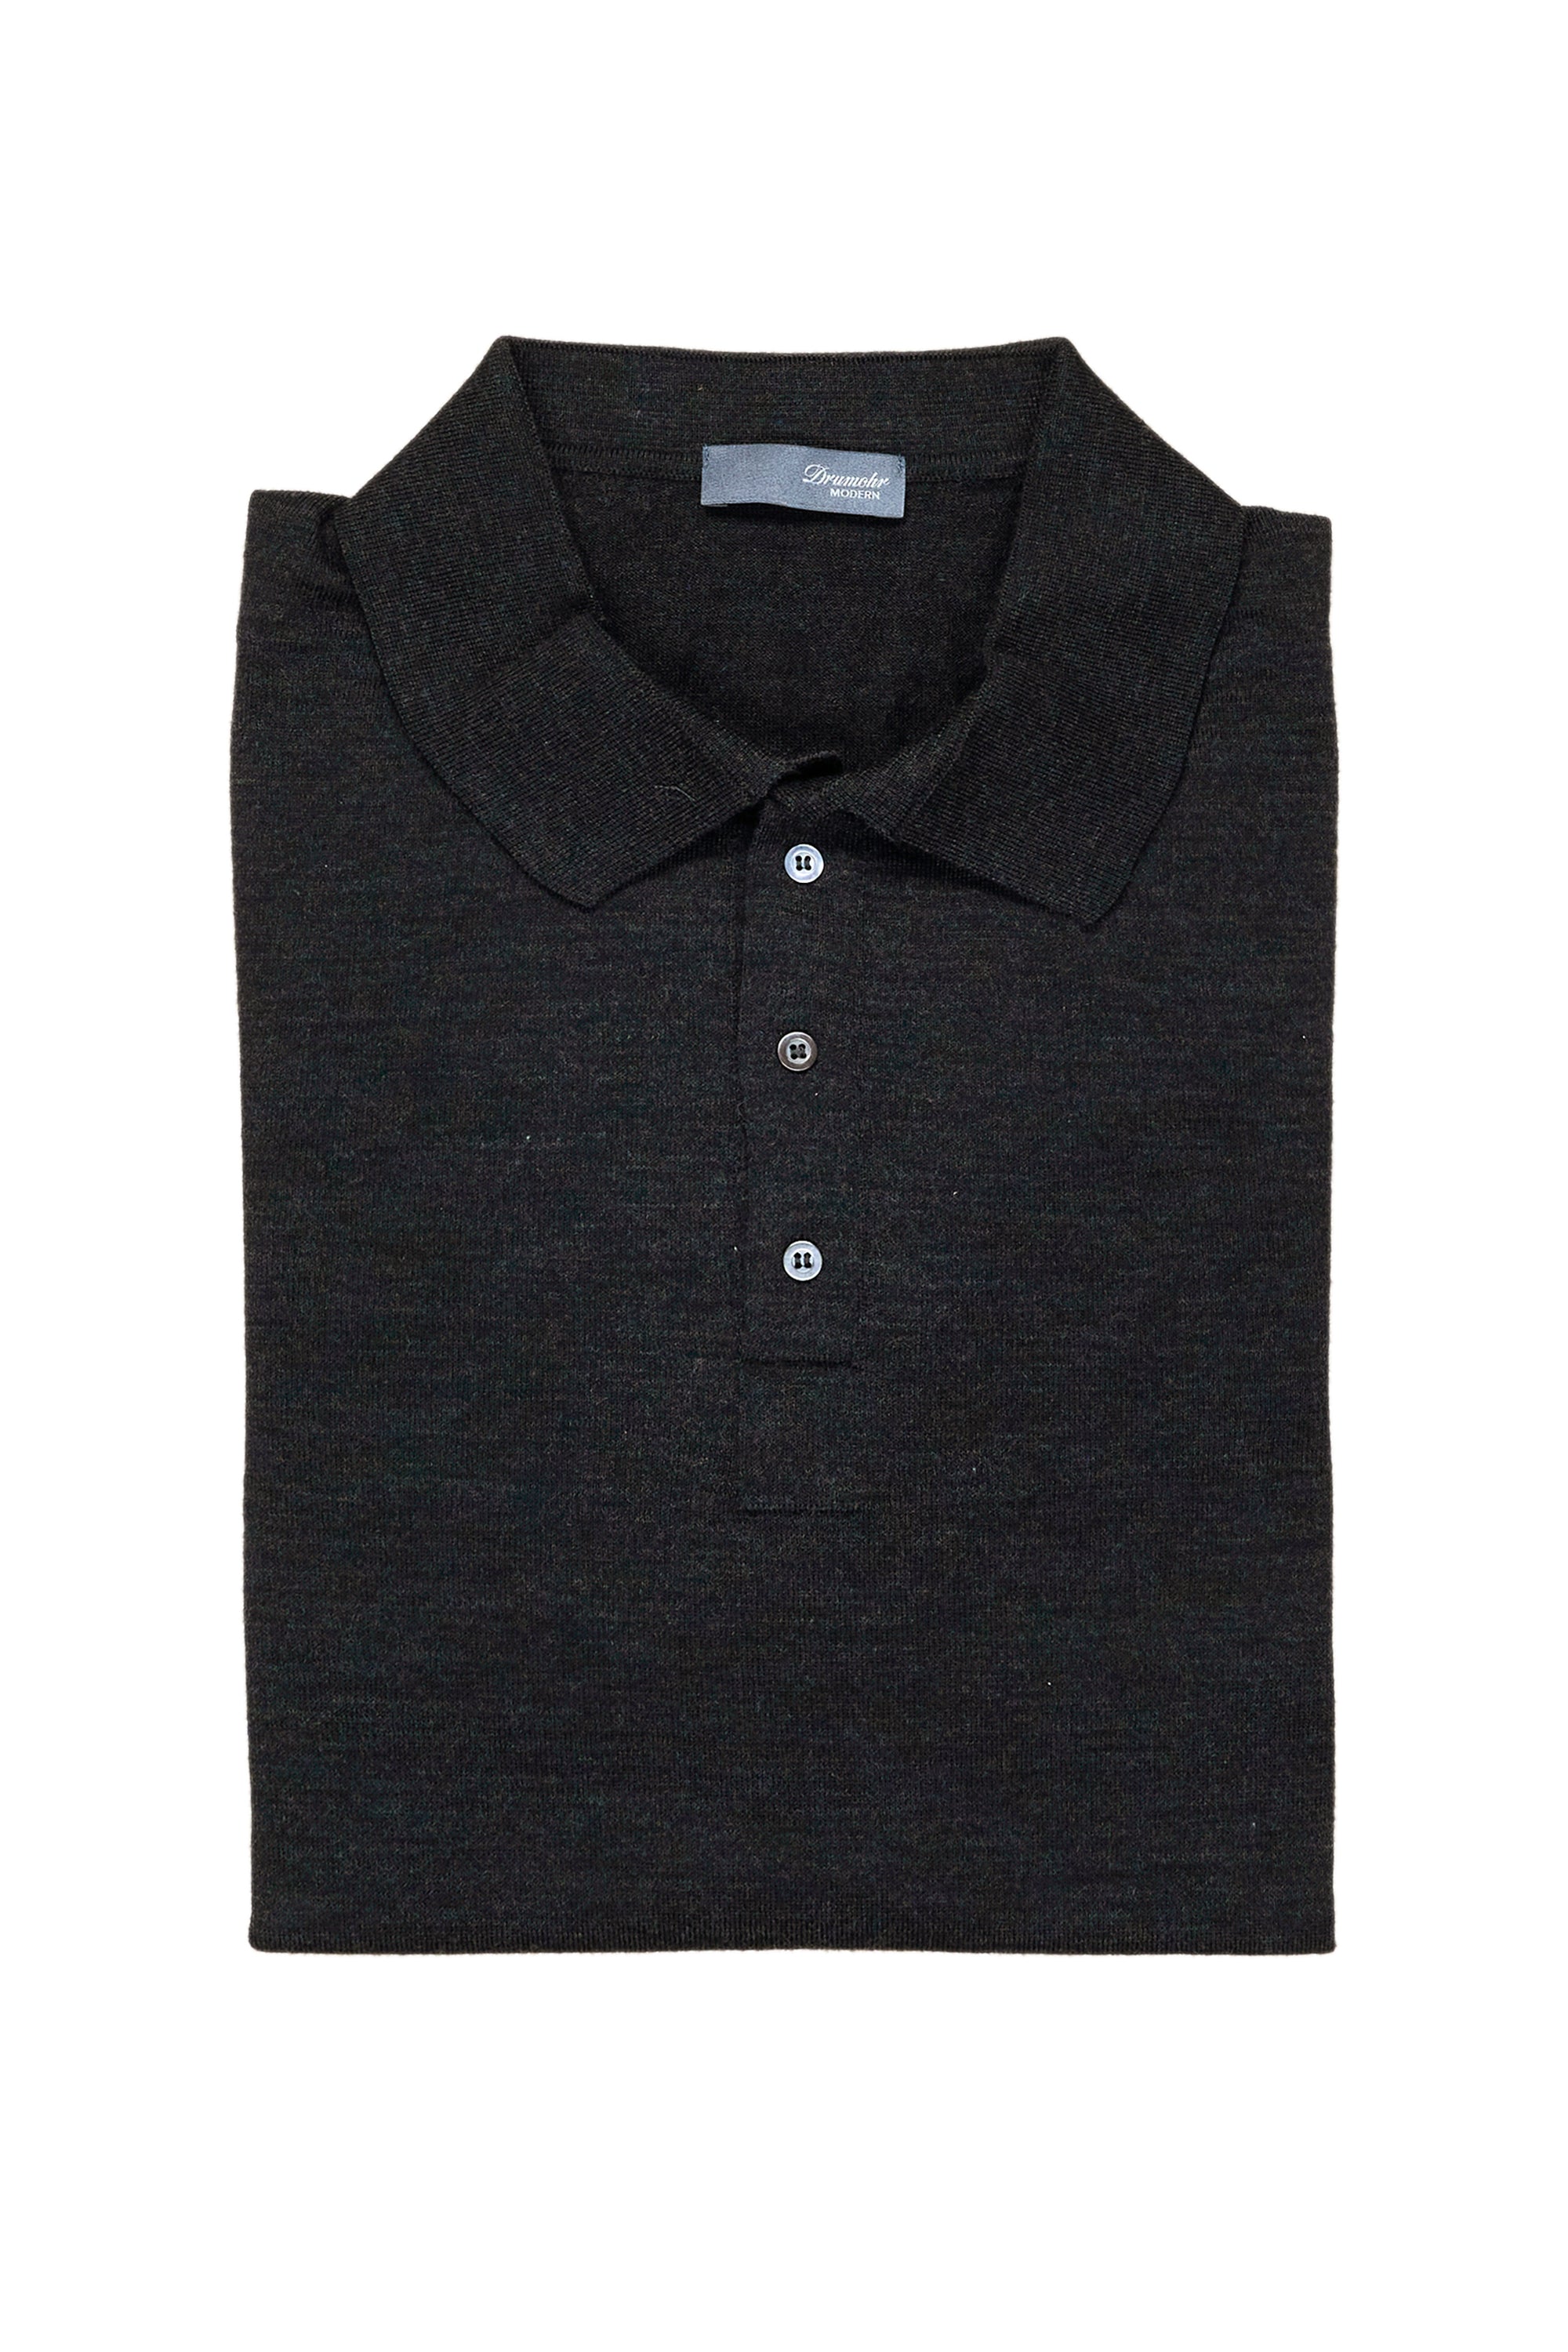 Drumohr Carbone Extra Fine Merino Wool Knitted Polo